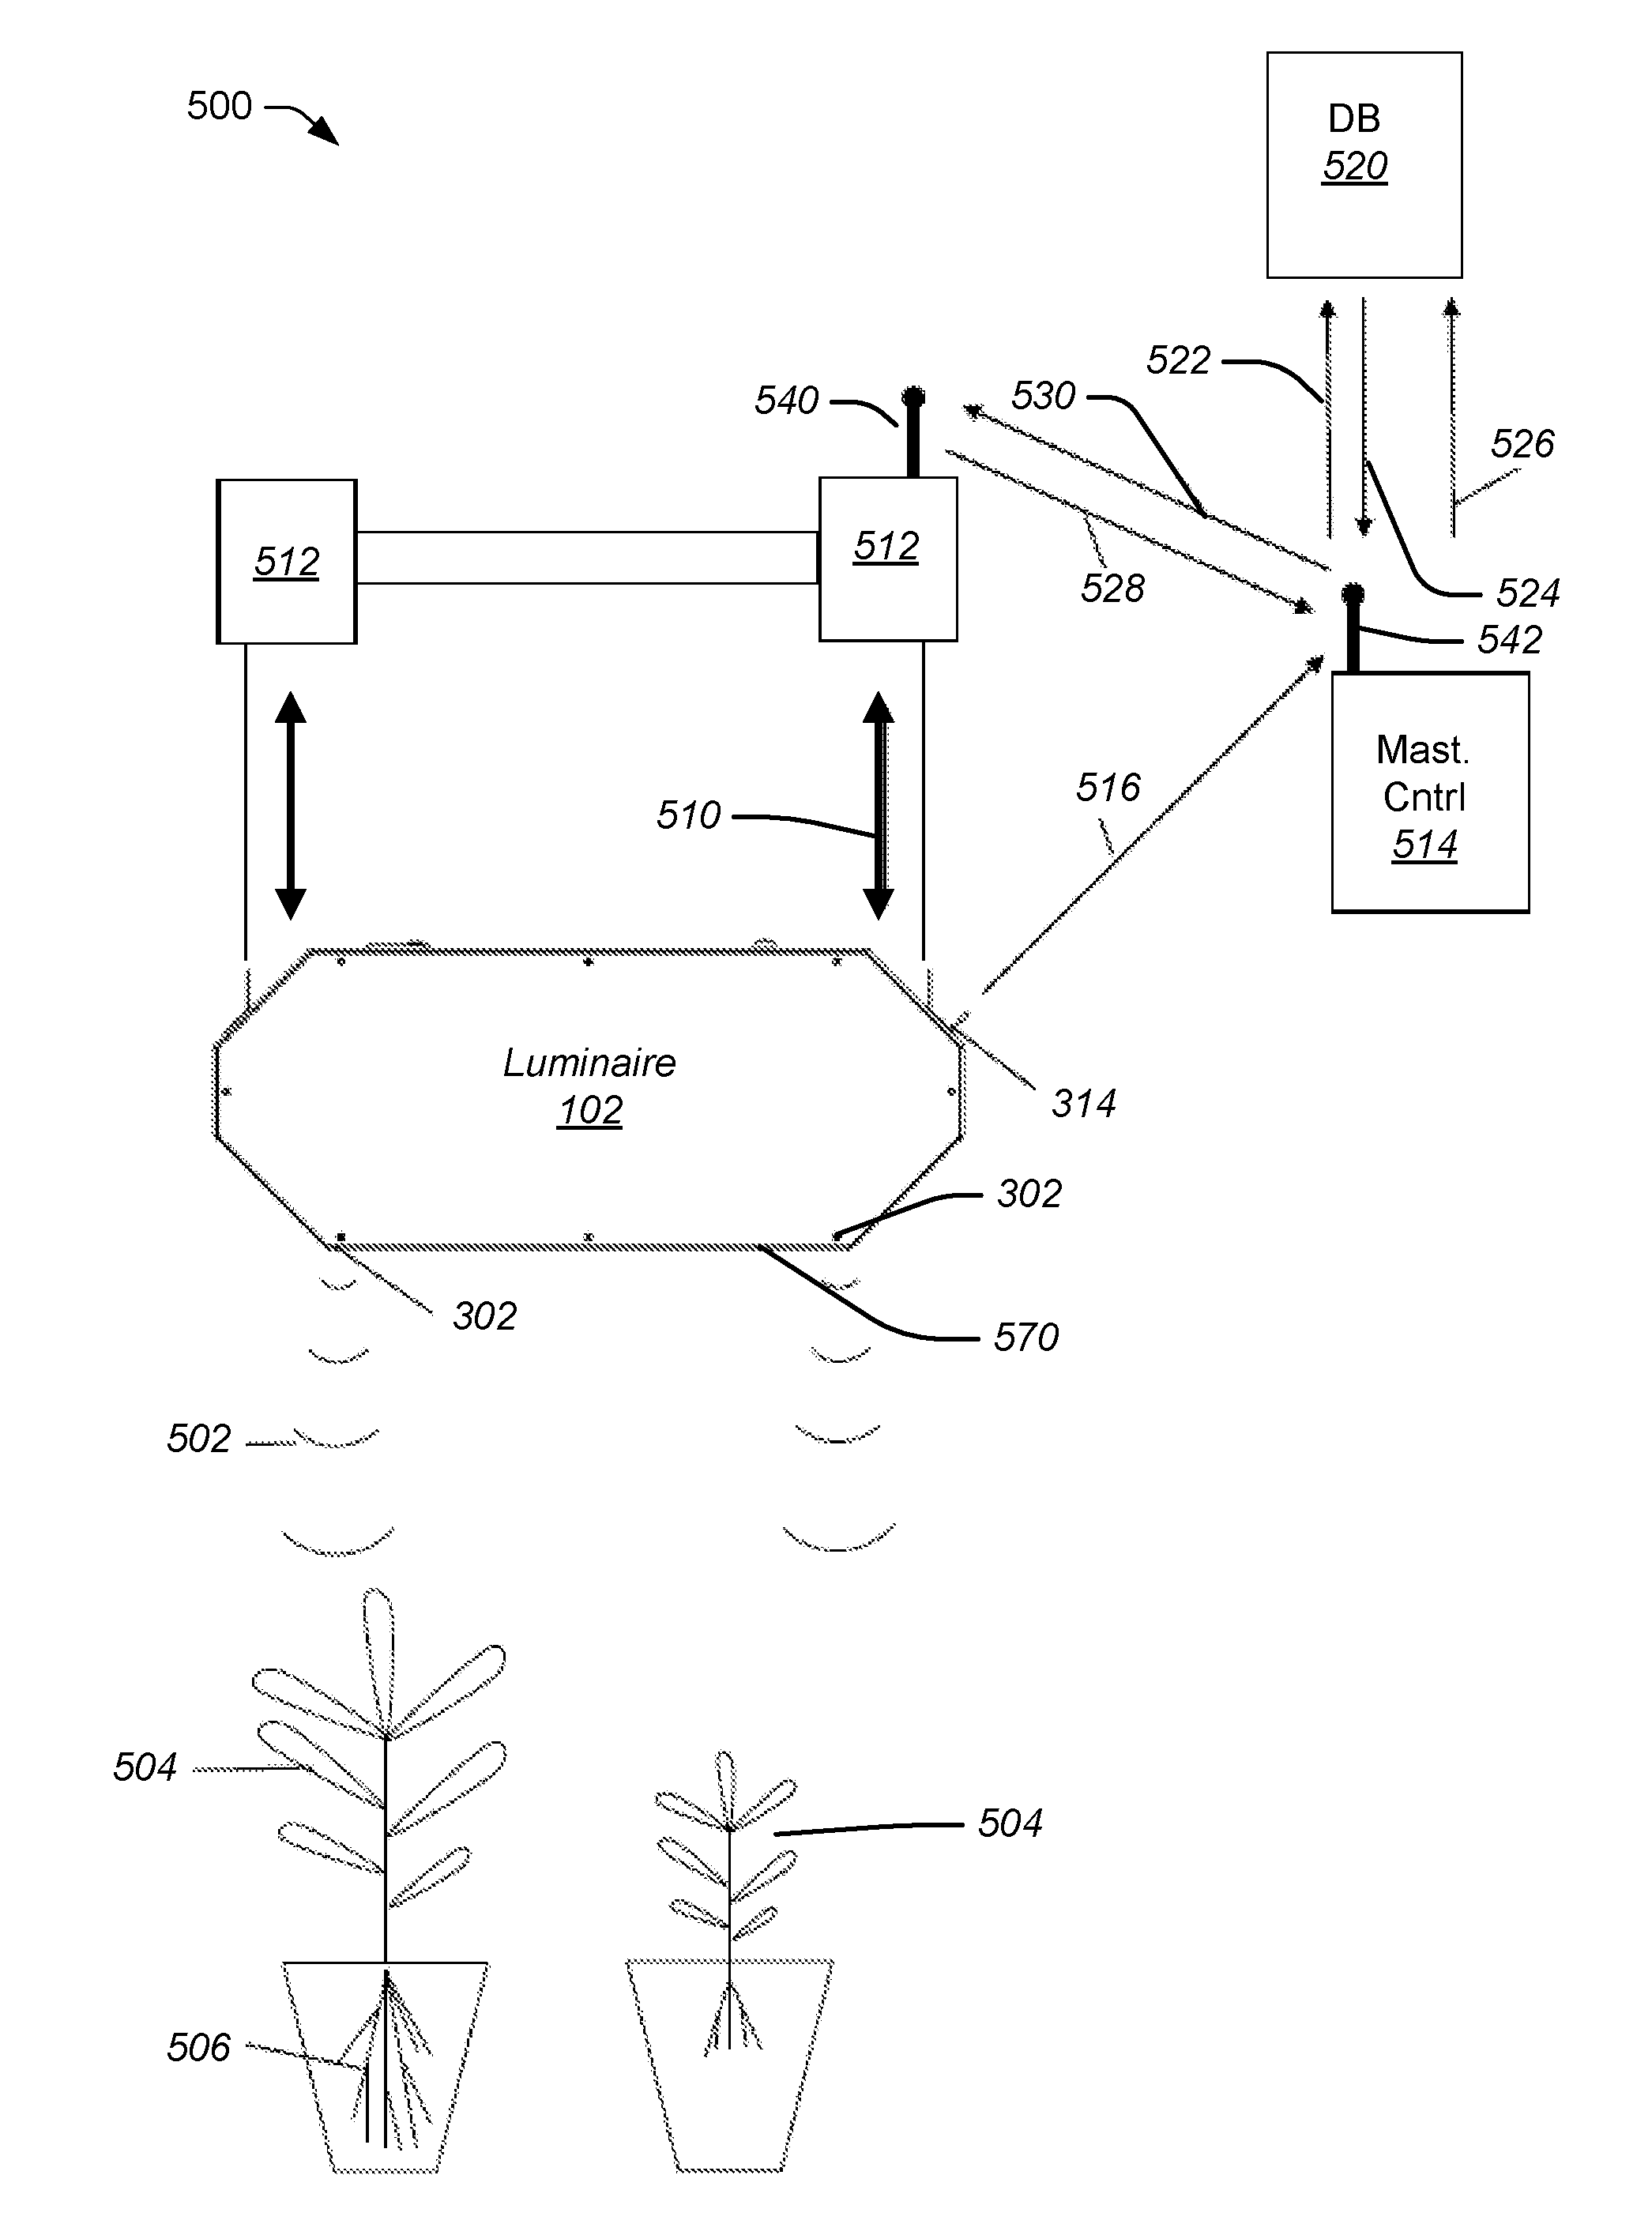 Radio-controlled lighting fixture with integrated sensors